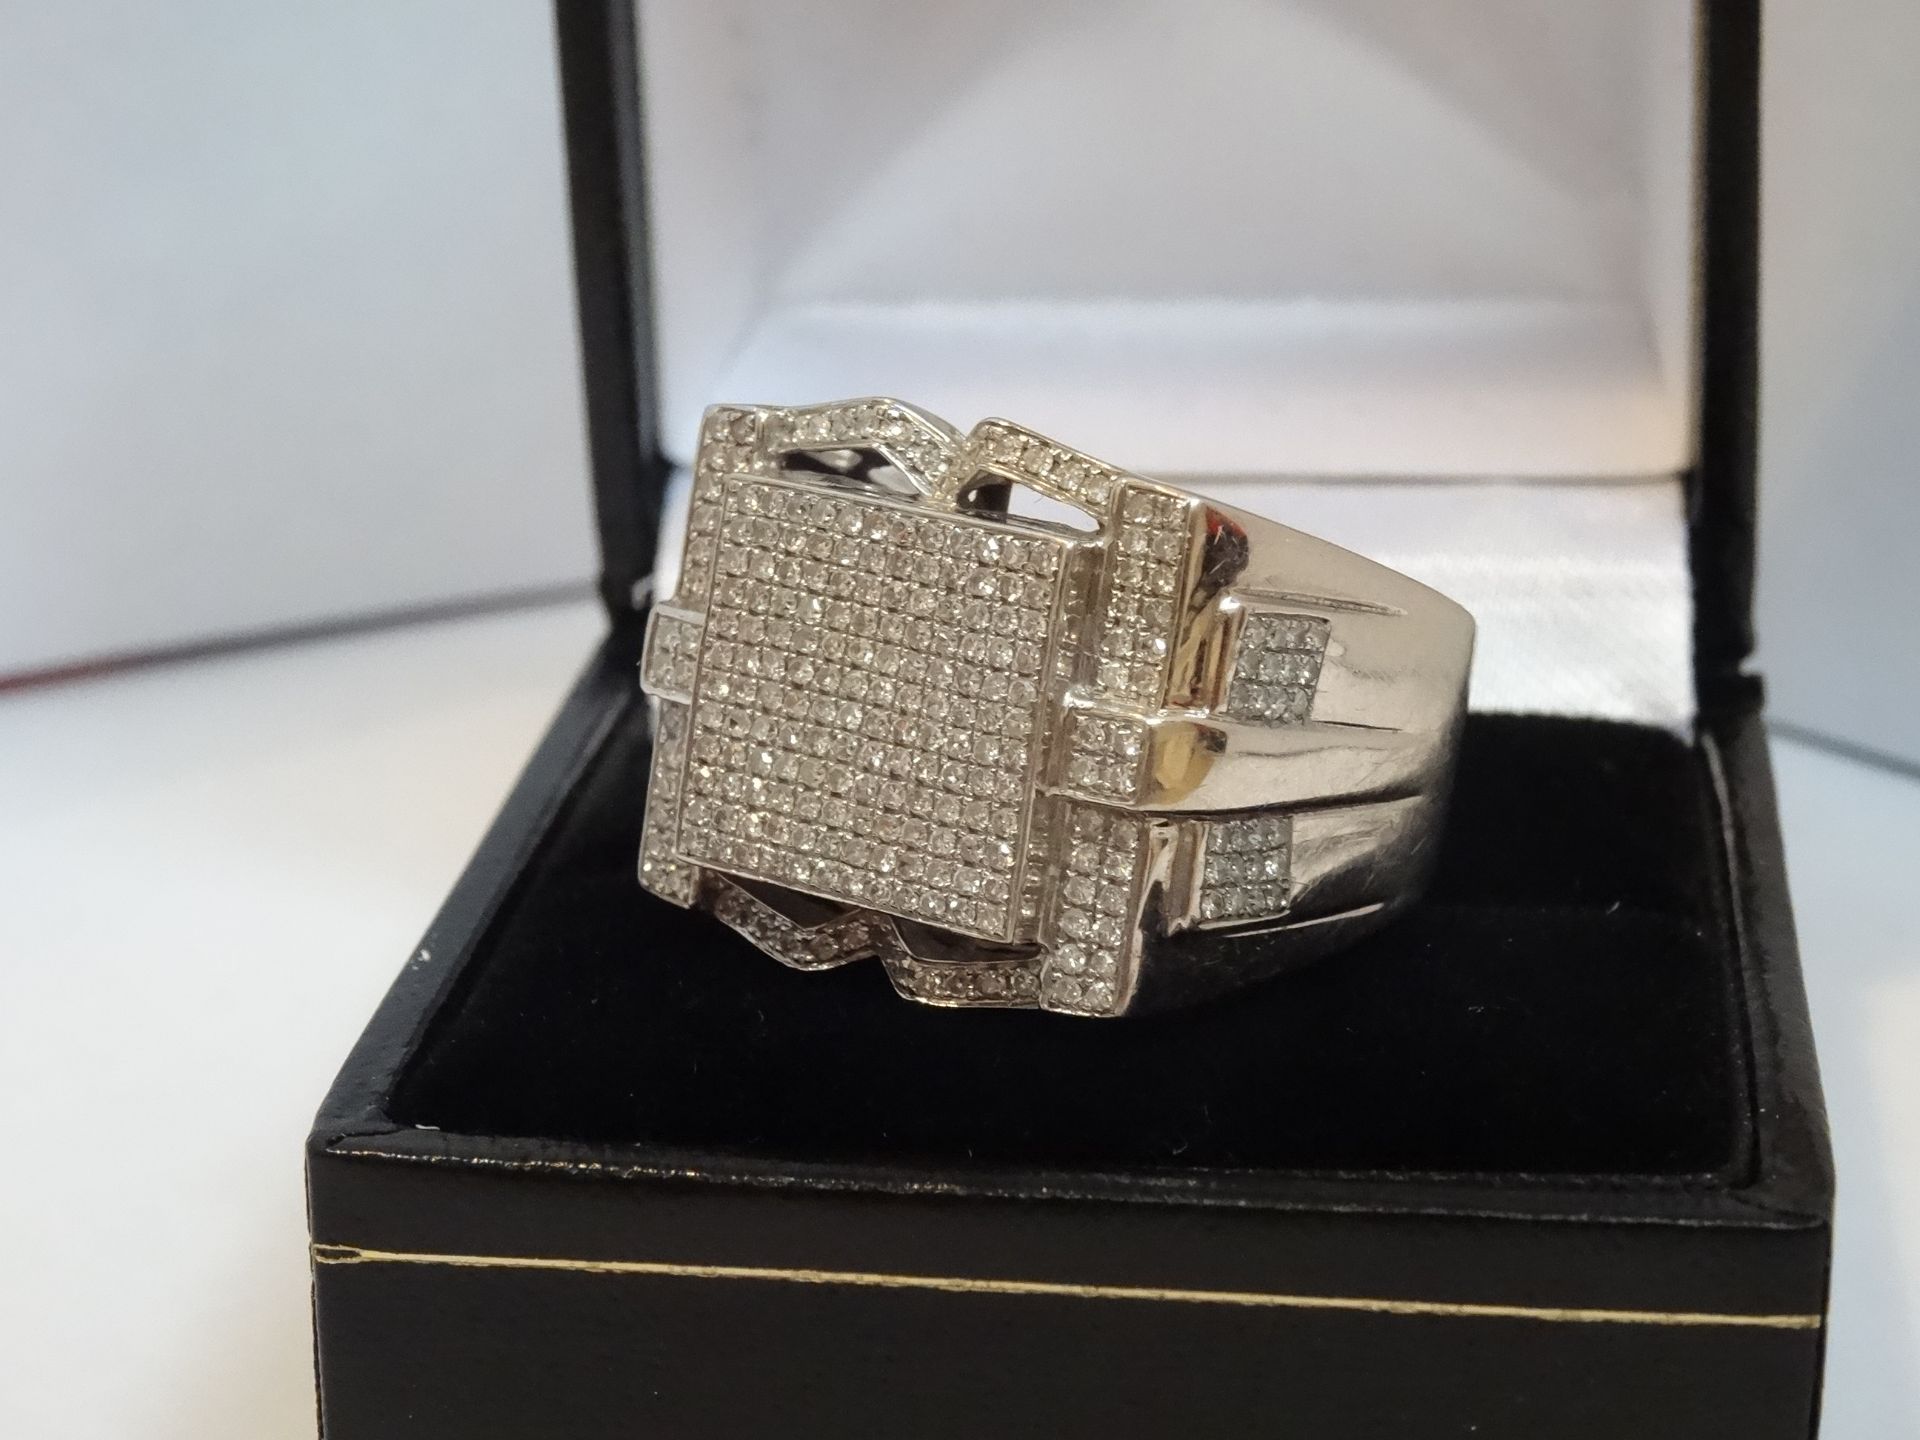 9 Carat White Gold Gents Signet Ring. Contains 1.55 Carats of Diamonds.